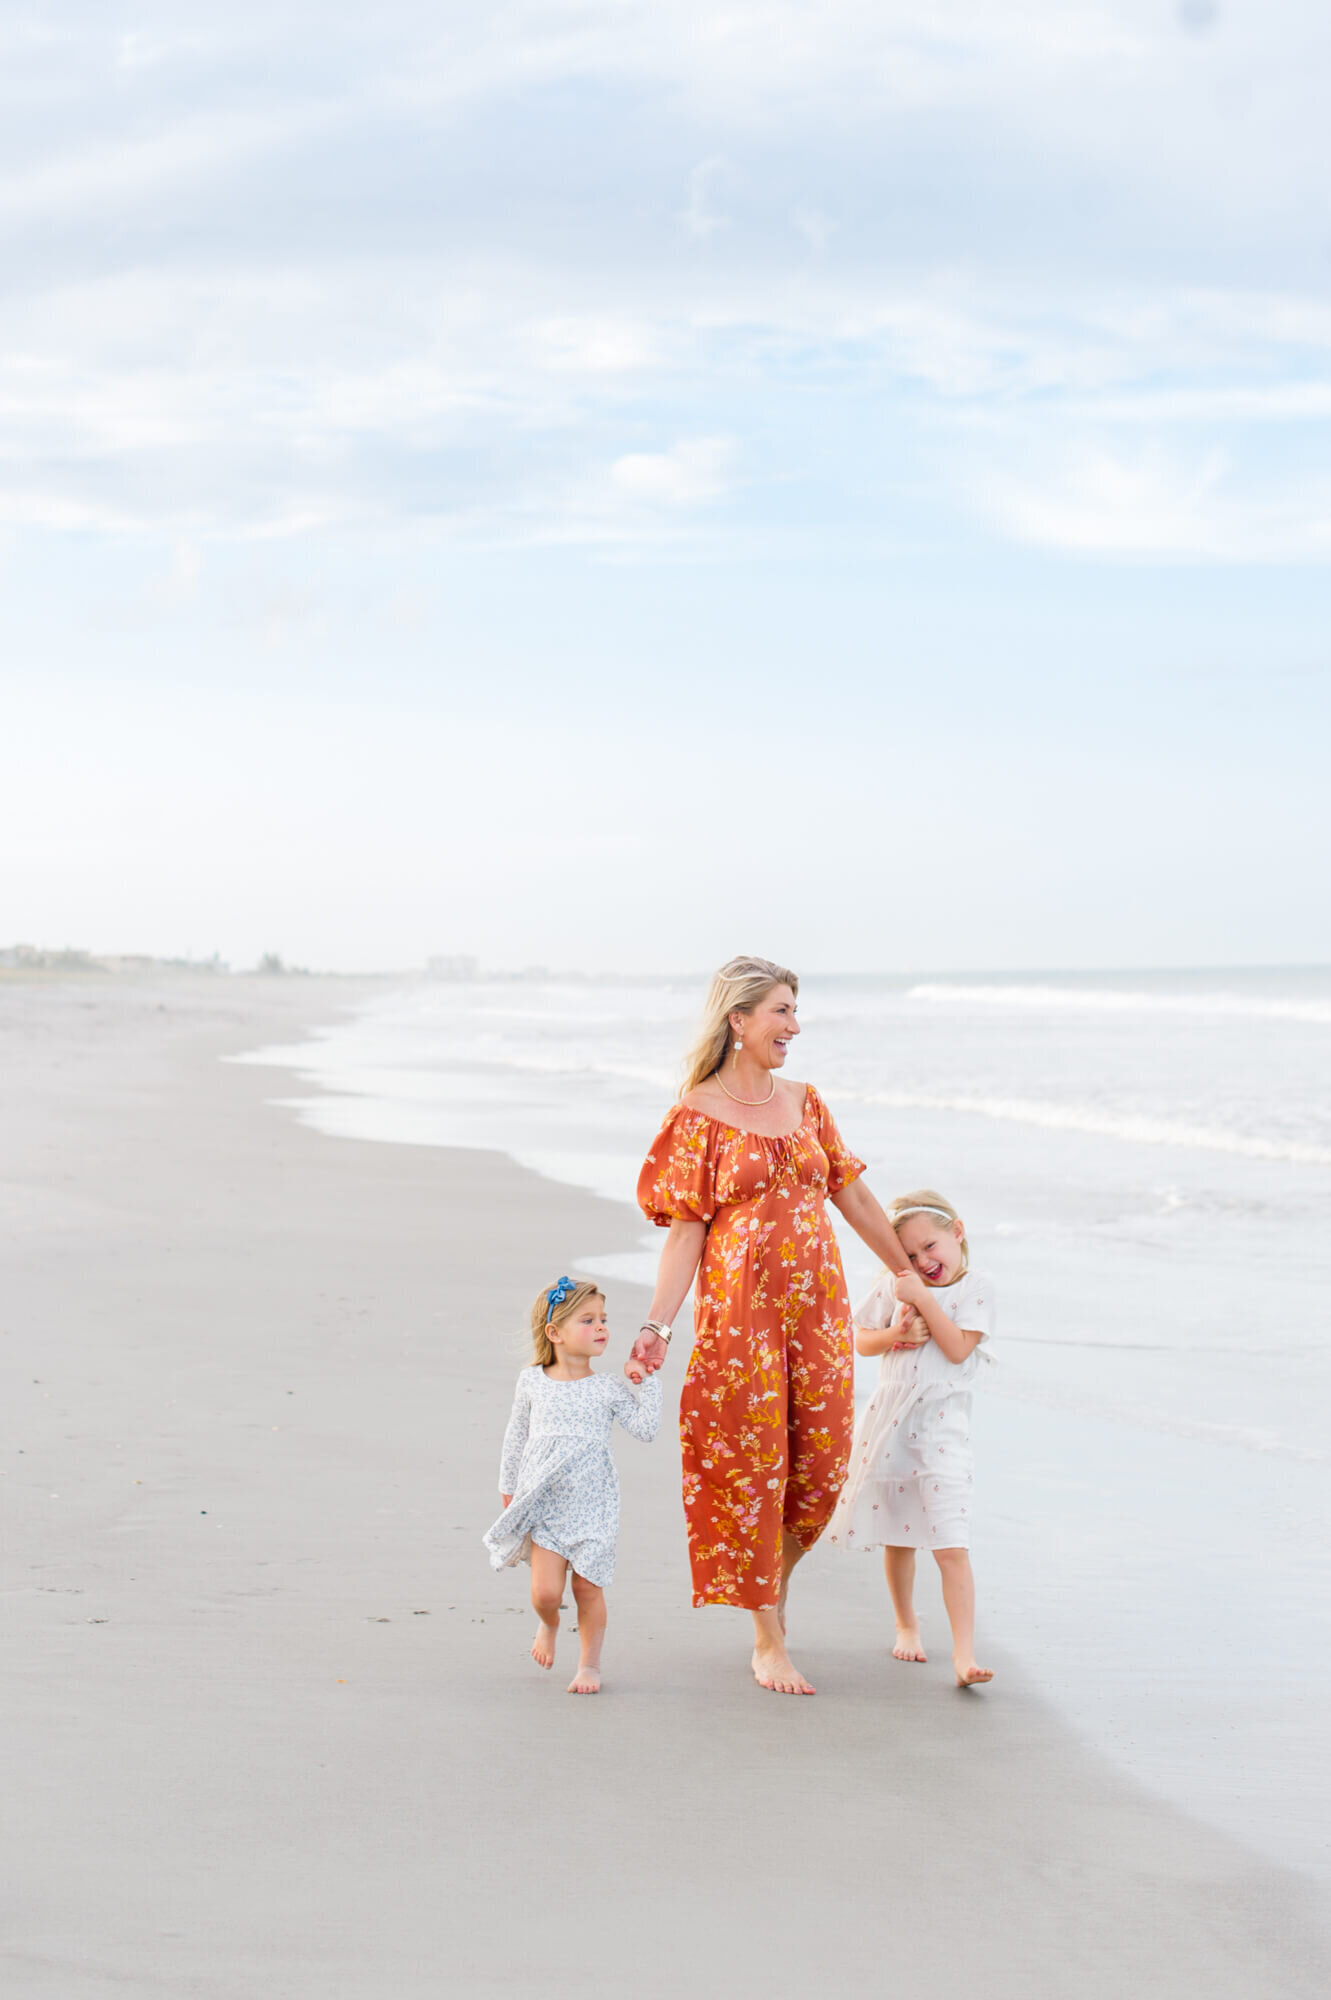 Grandma walking on the beach with her grandkids during an extended family photography session